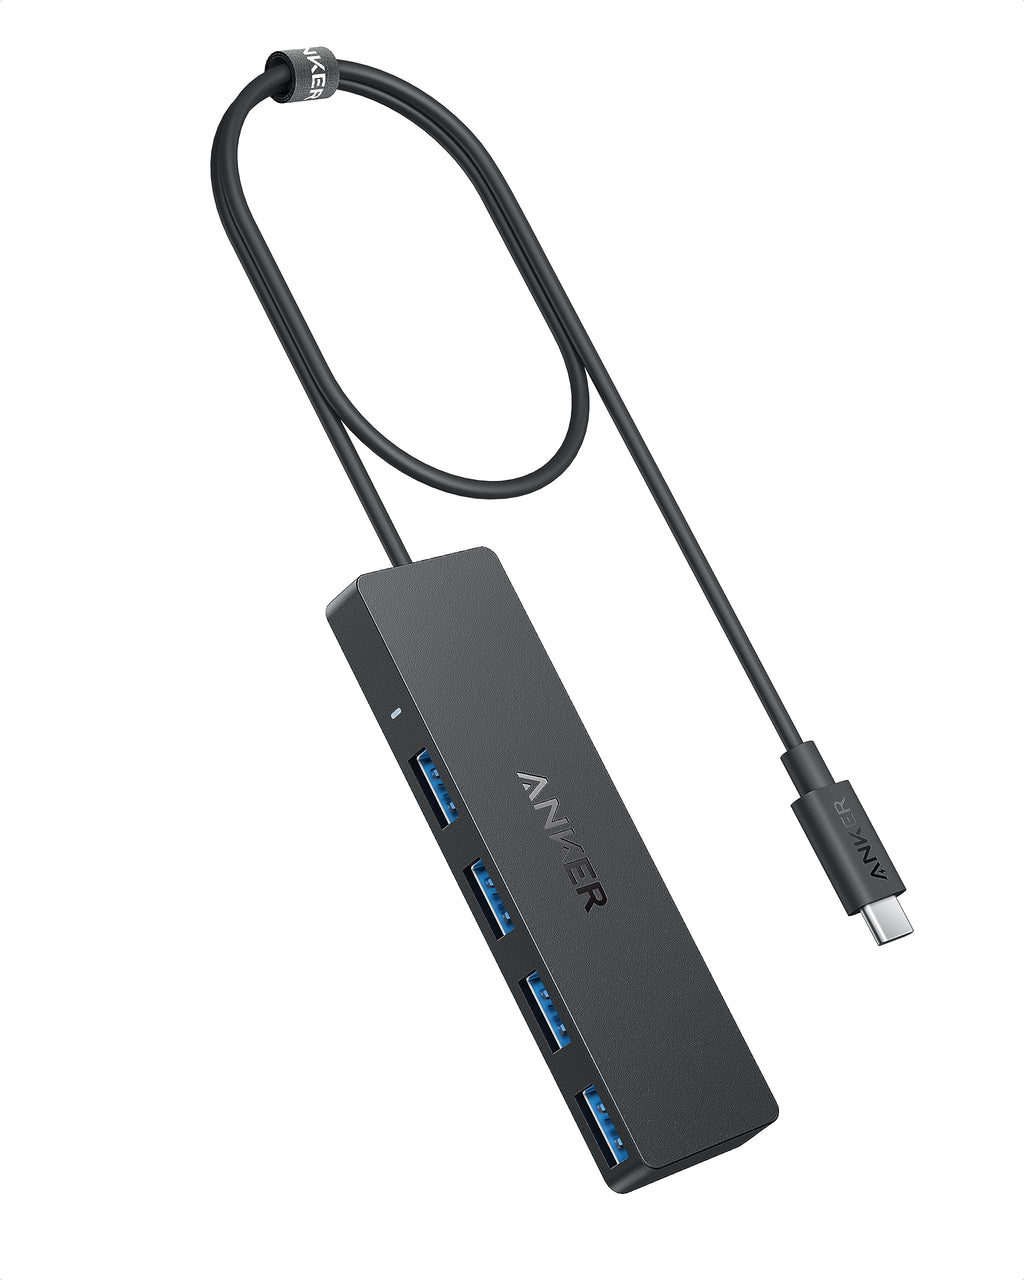 Anker USB C Hub, 4 Ports USB 3.0 Hub with 5Gbps Data Transfer, 2ft Extended Cable [Charging Not Supported], USB C Splitter for Type C MacBook, Mac Pro, iMac, Surface, XPS, Flash Drive, Mobile HDD 2 ft USB-C